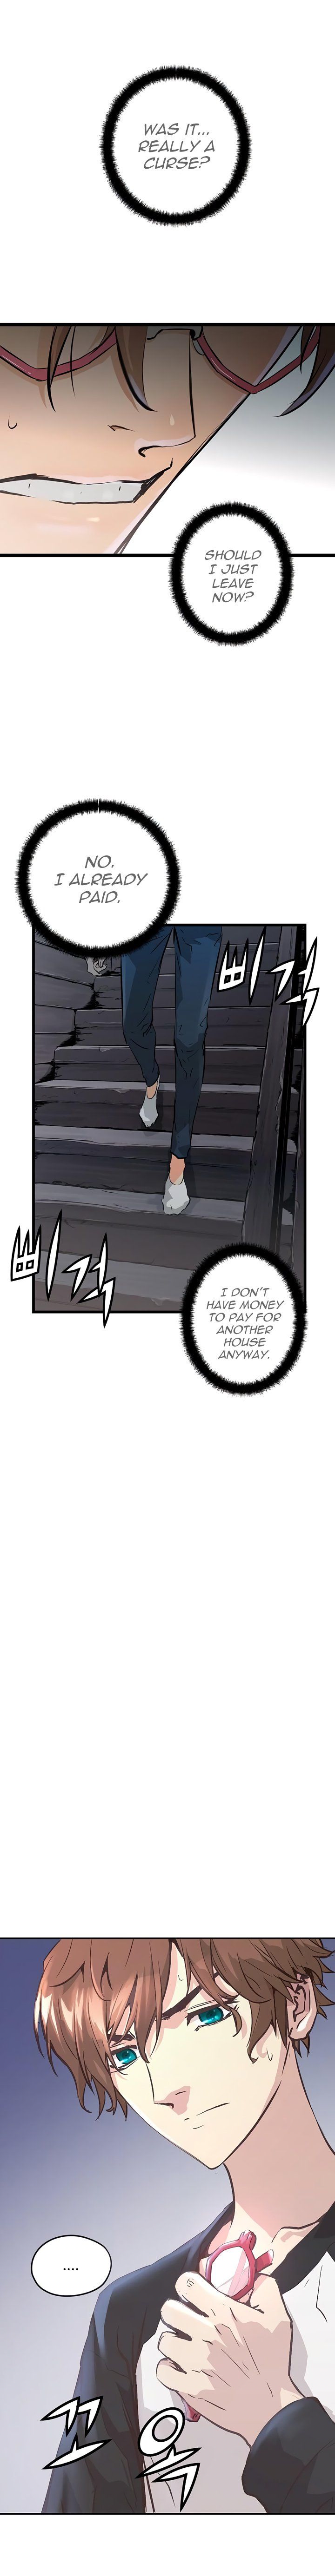 Promised Orchid - Chapter 45 - Mangatx